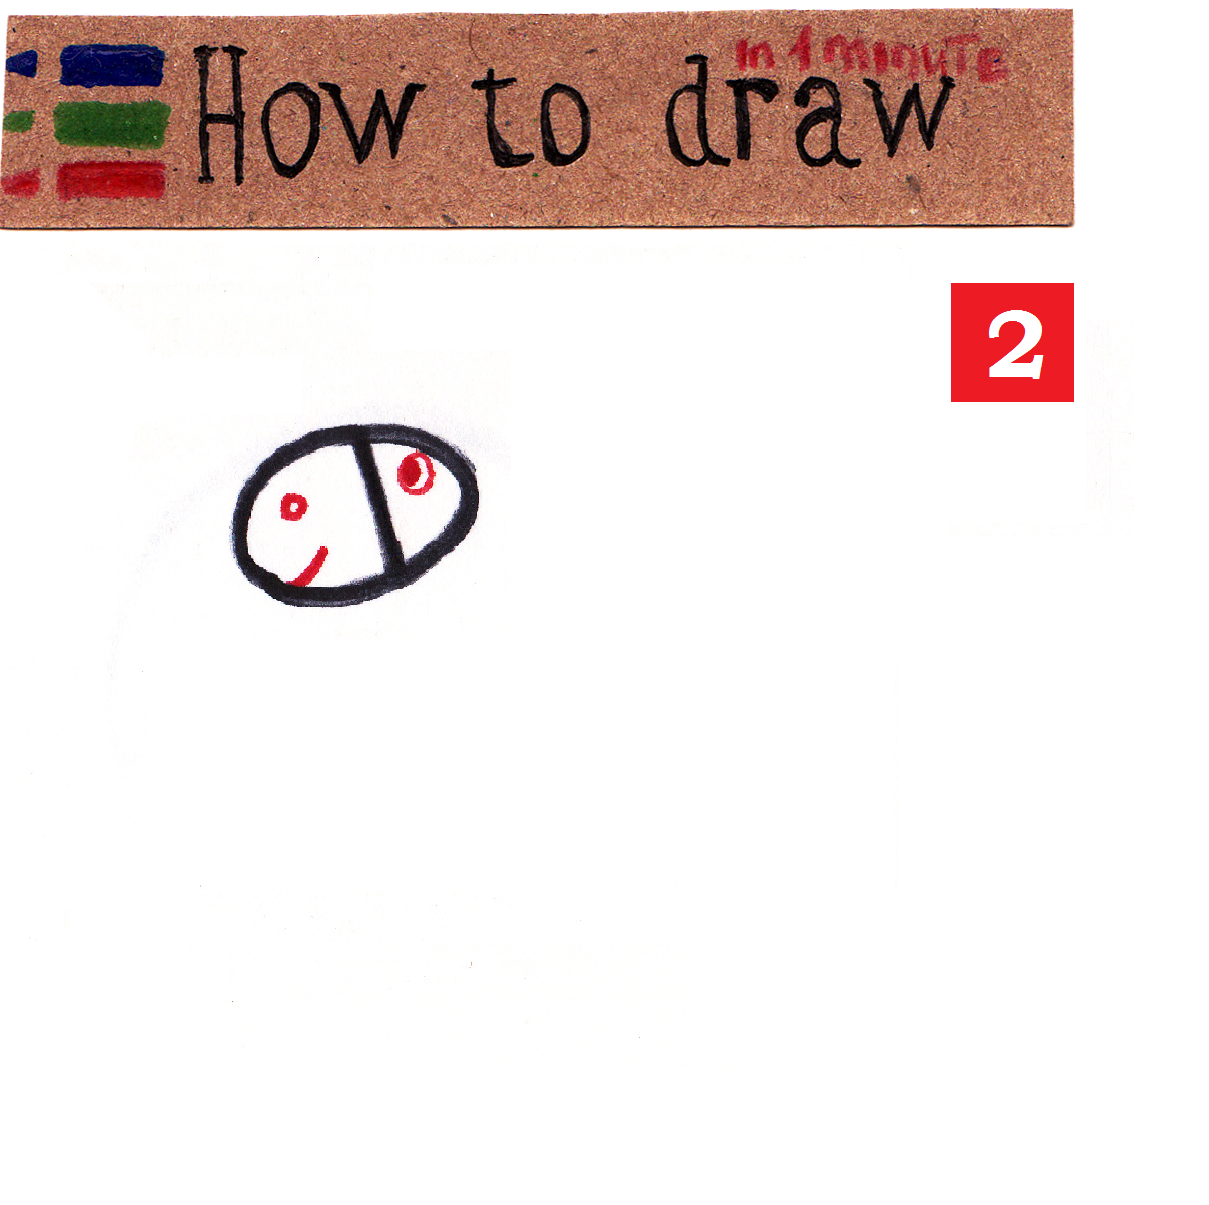 How to draw a donkey - a simple lesson for kids